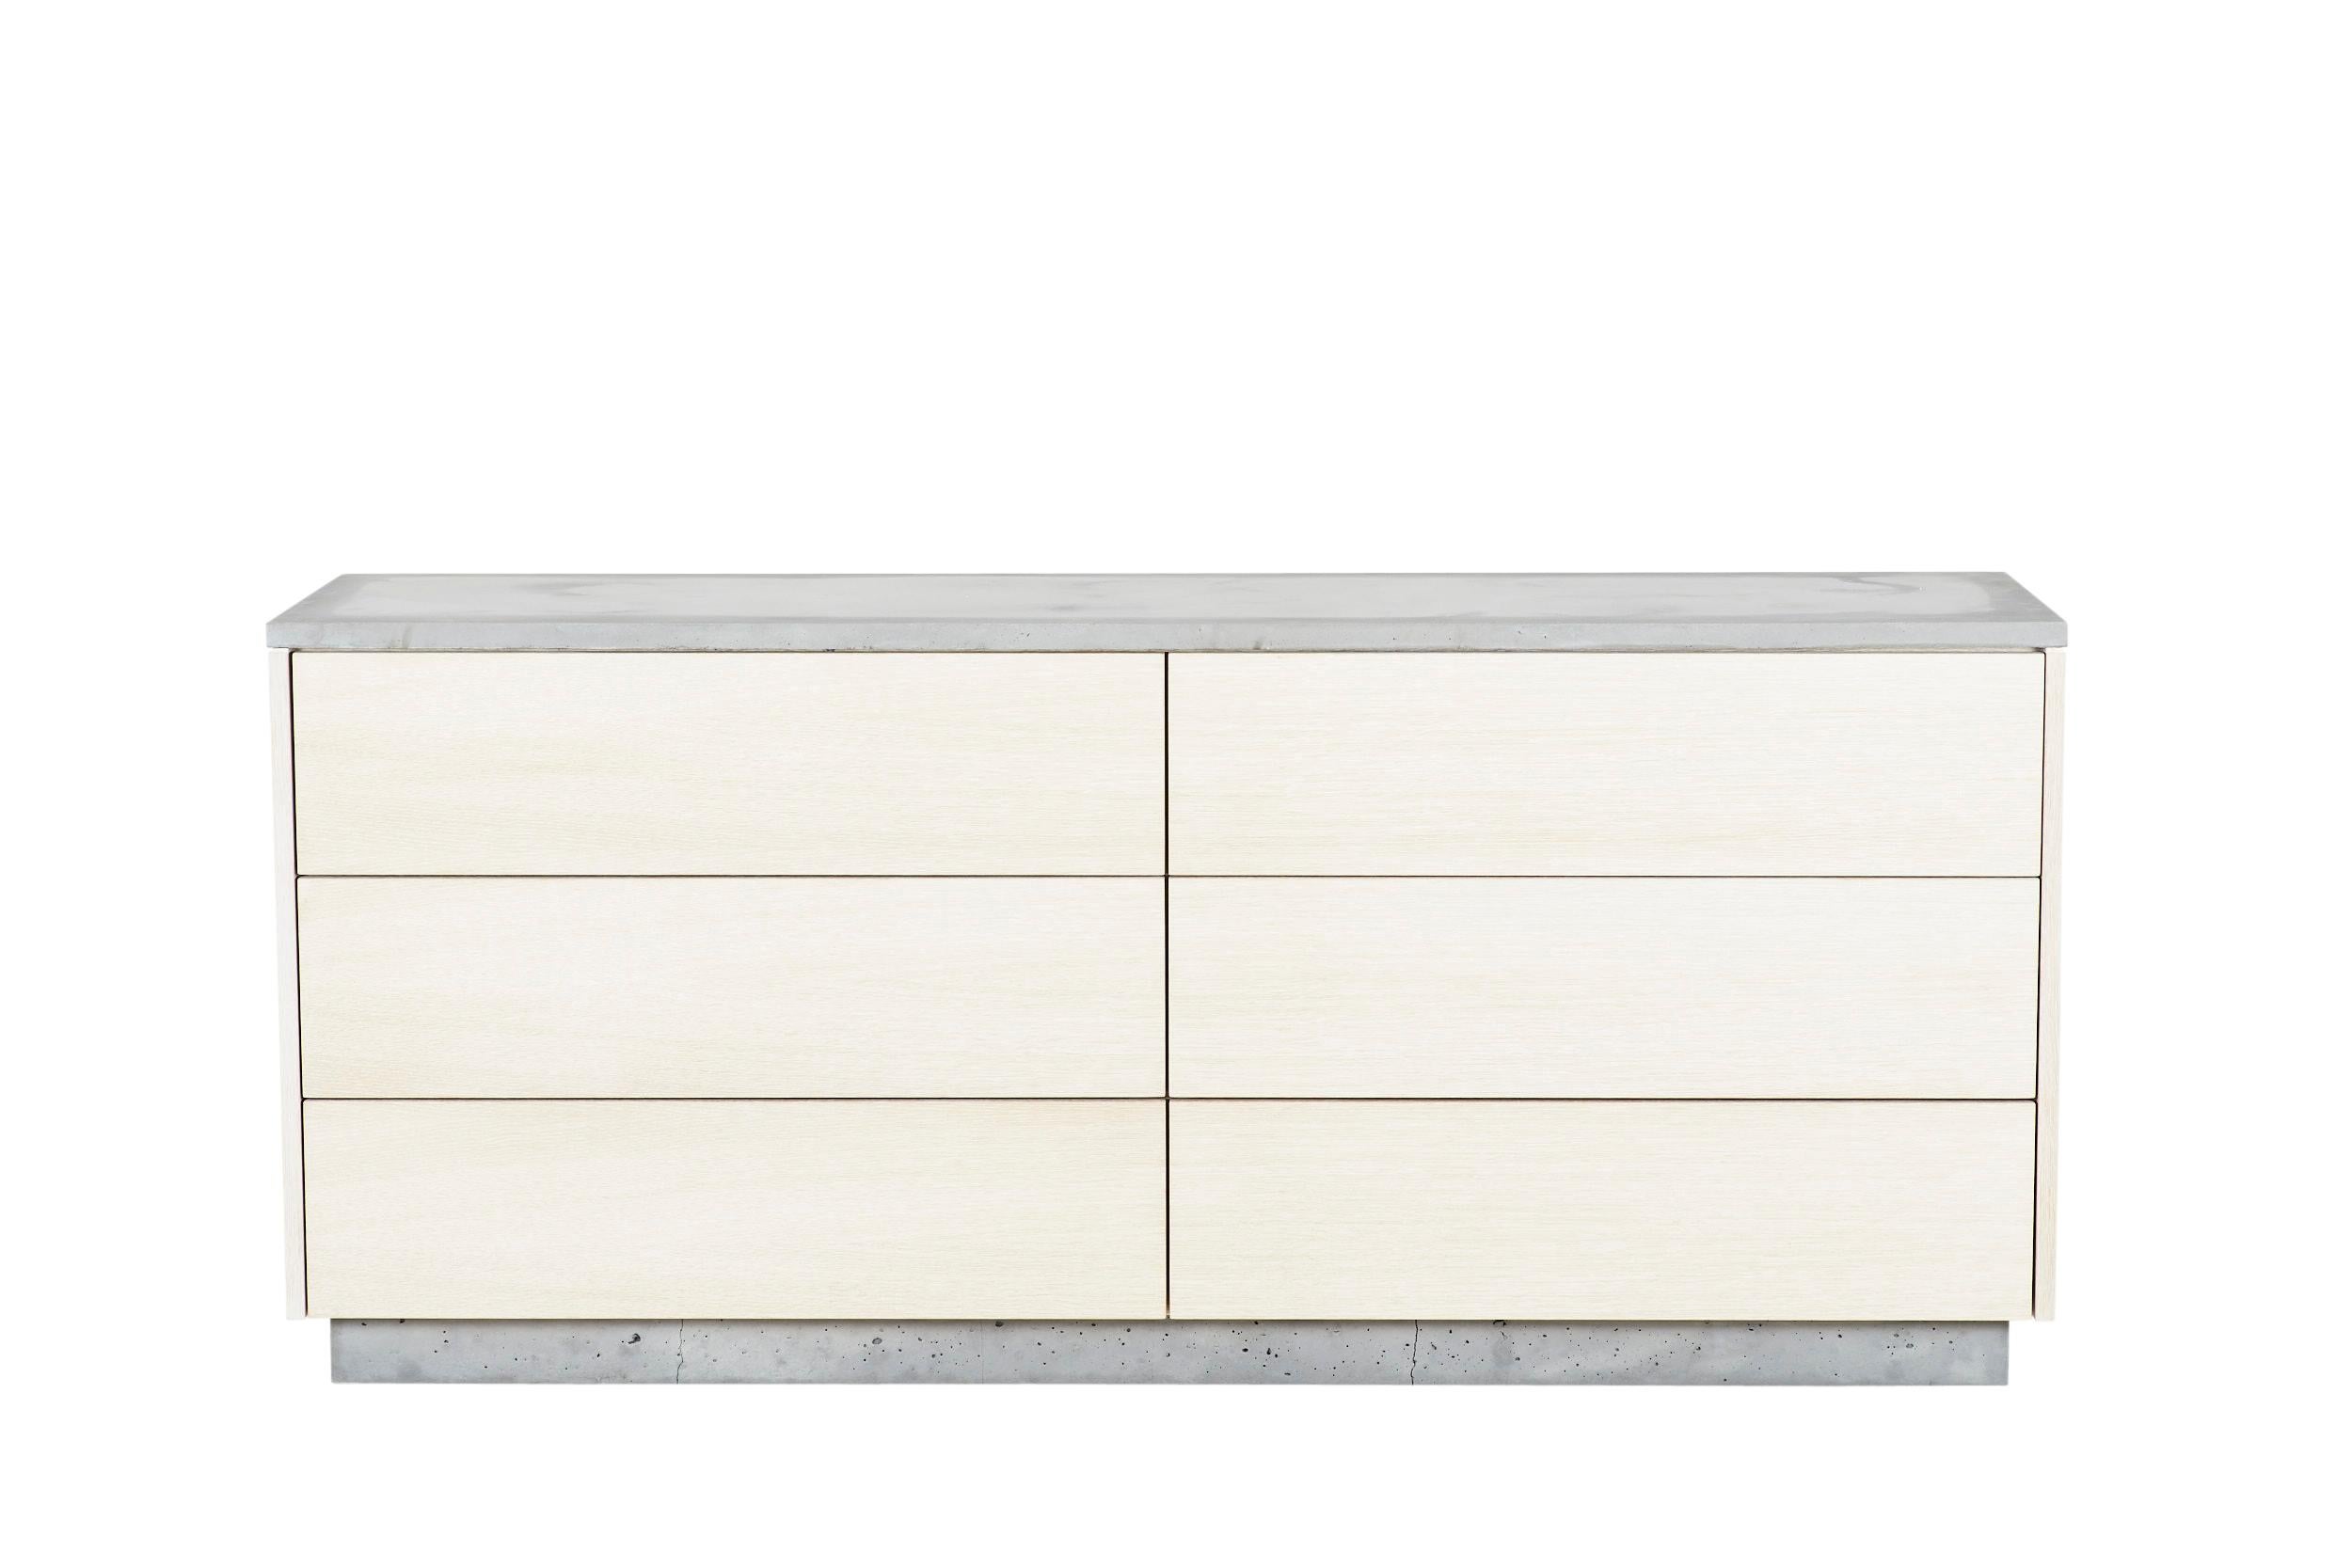 This 6-drawer dresser features clean and simple lines. The exterior is composed of white stained rift-cut white oak with an oil finish. The counter top and base are cast-concrete while the insides reveal a burst of color with mint-green drawers. The